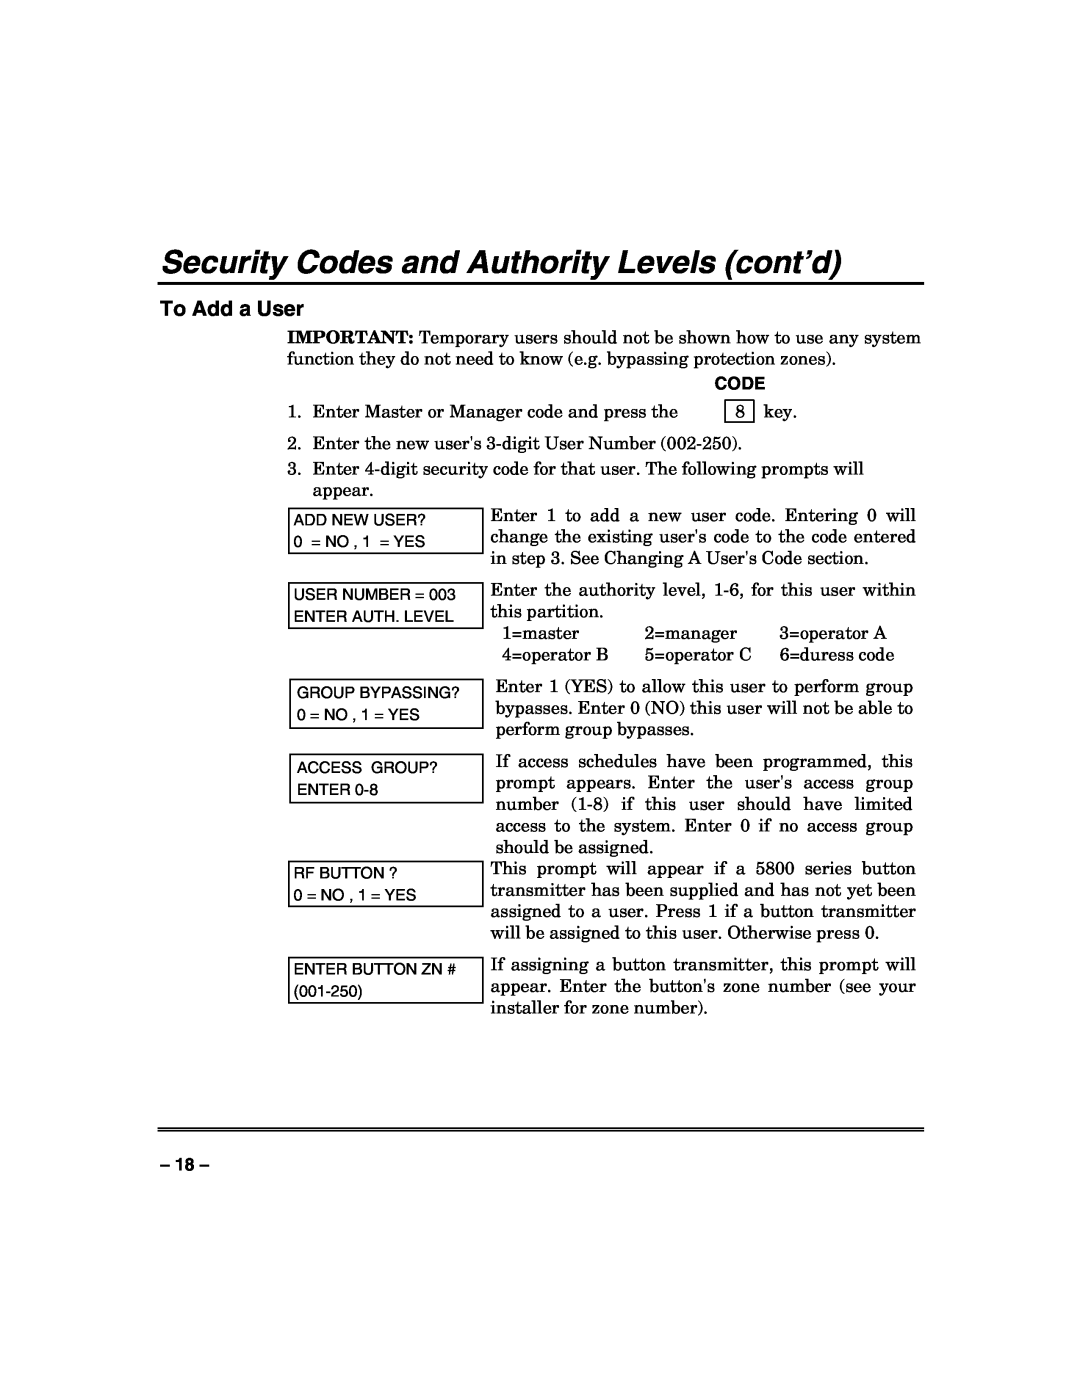 Honeywell VISTA250BPT, VISTA128BPT, 128BPTSIA manual To Add a User, Security Codes and Authority Levels cont’d 